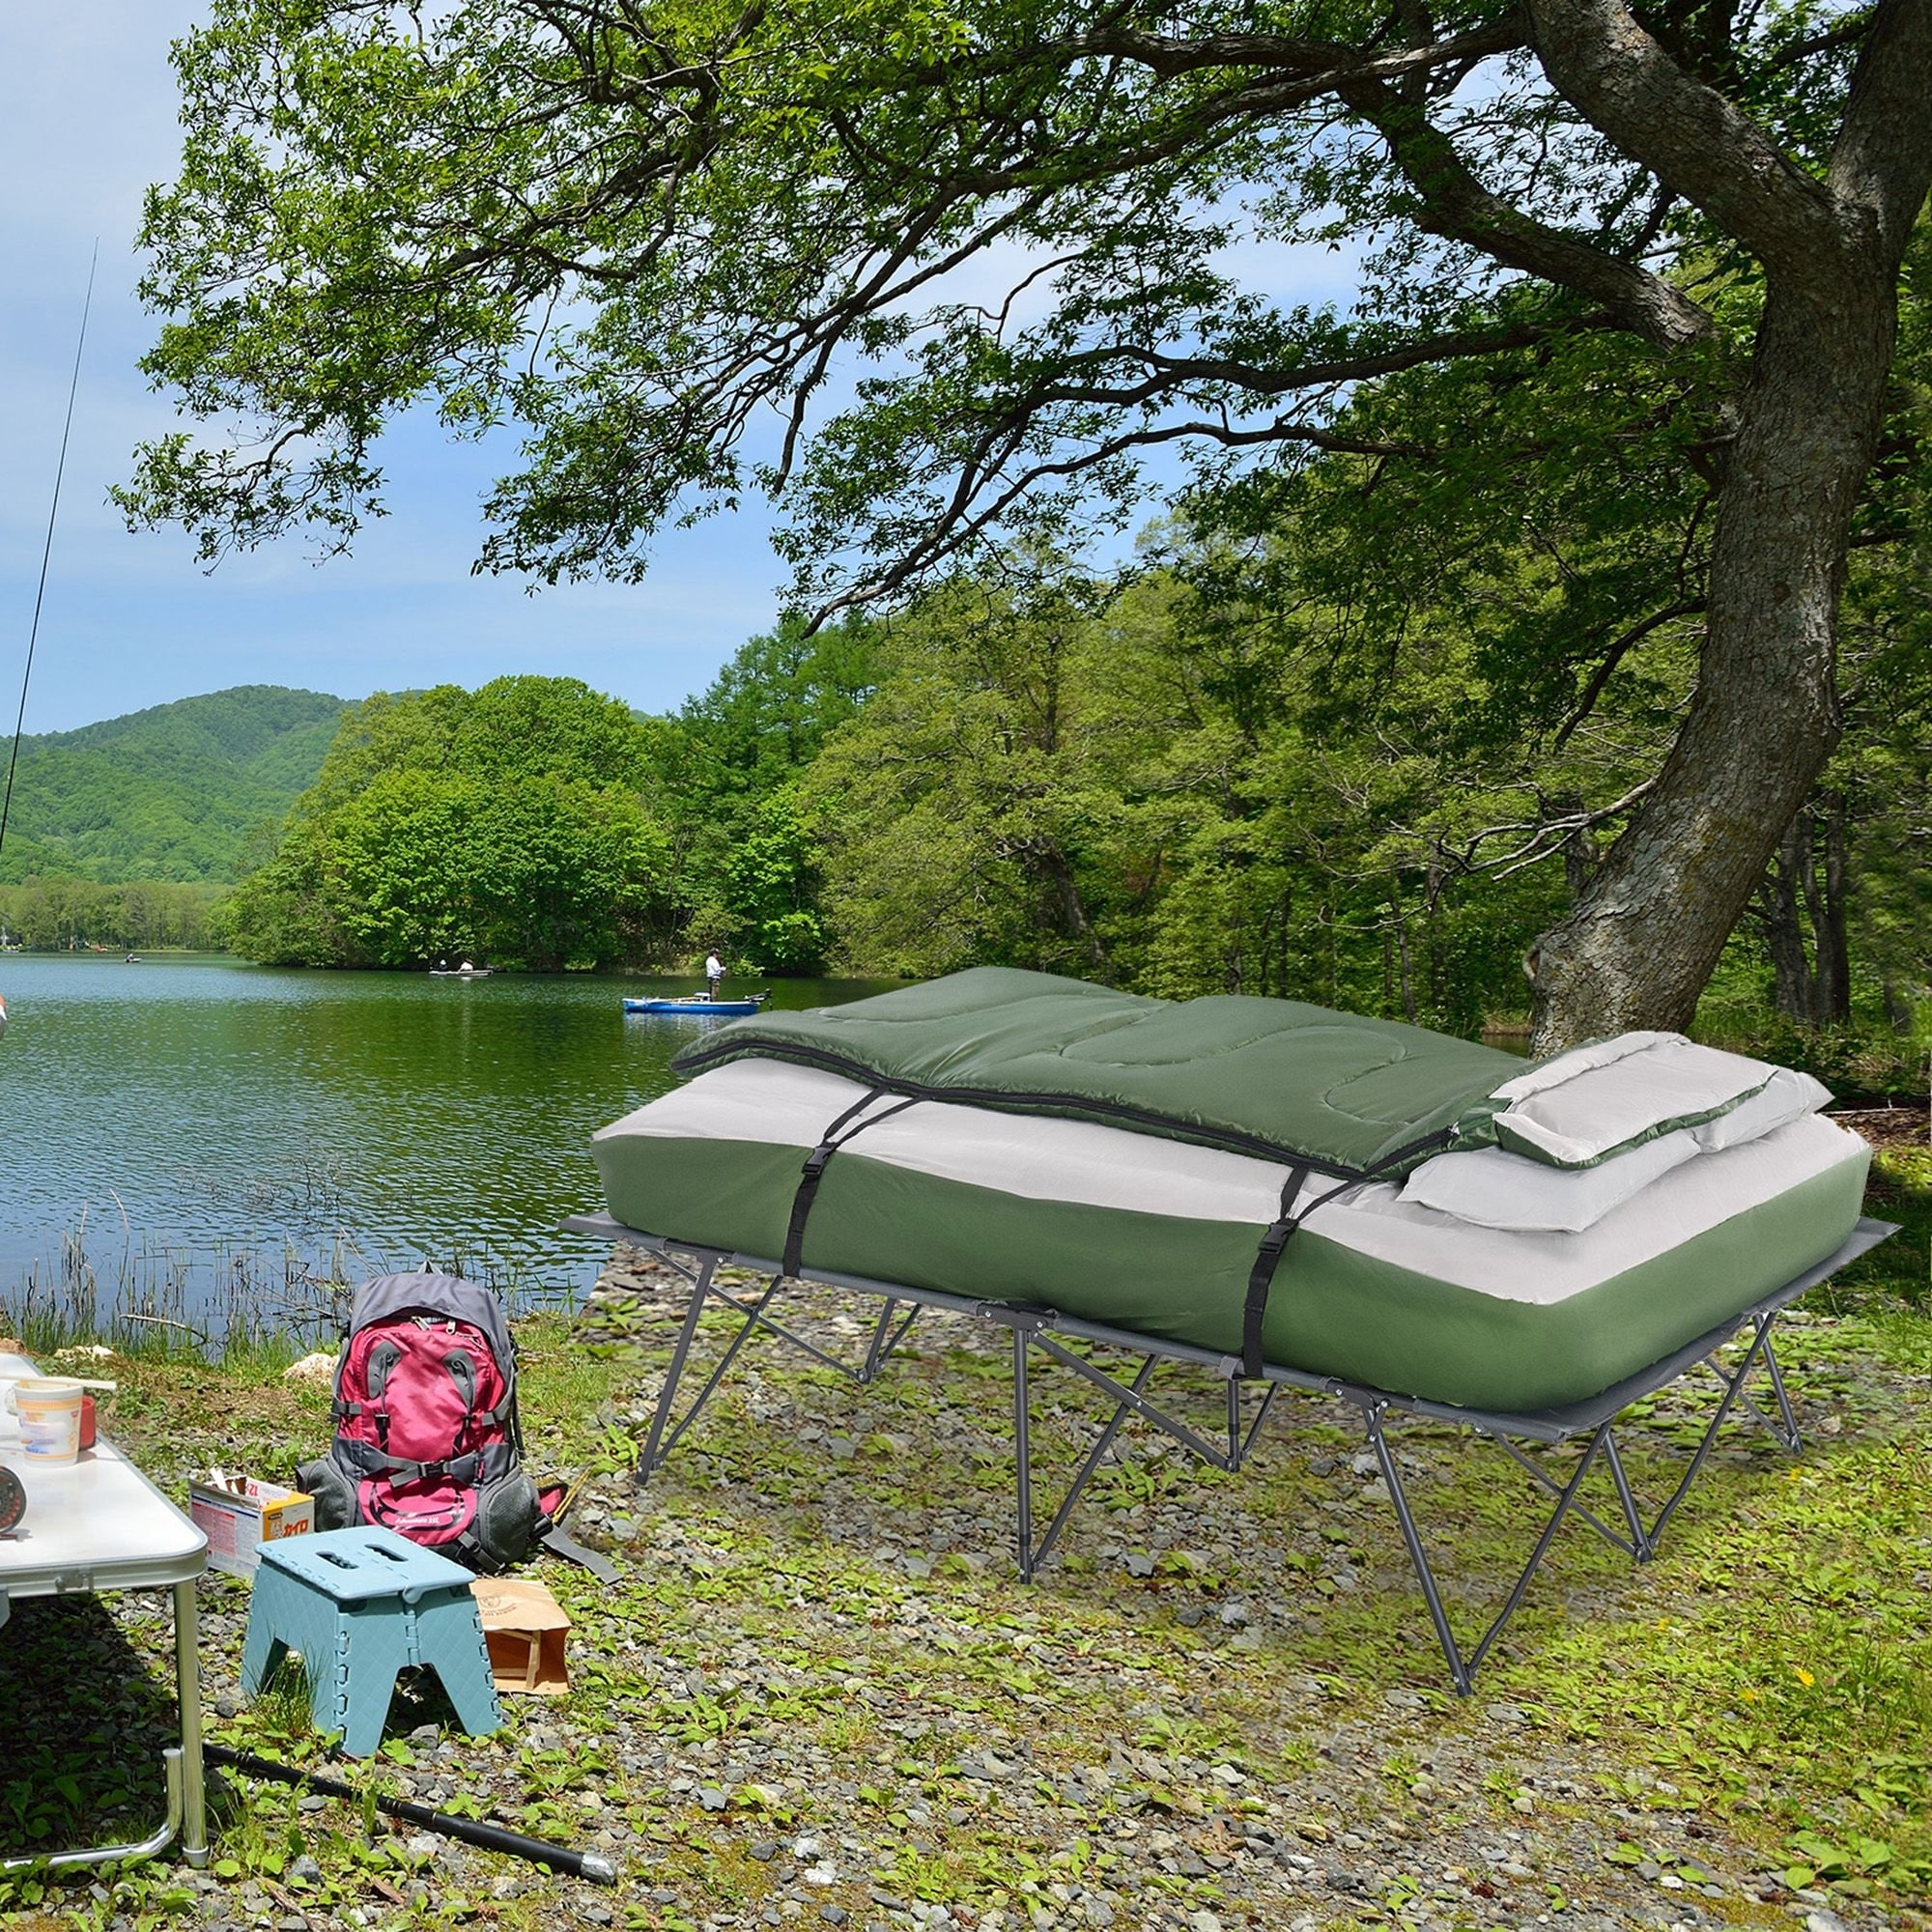 Outsunny 2 Person Foldable Camping Cot, Portable Outdoor With Sleeping Bag  & Thick Air Mattress, Multifunctional Elevated Camping Bed Tent For 2 :  Target